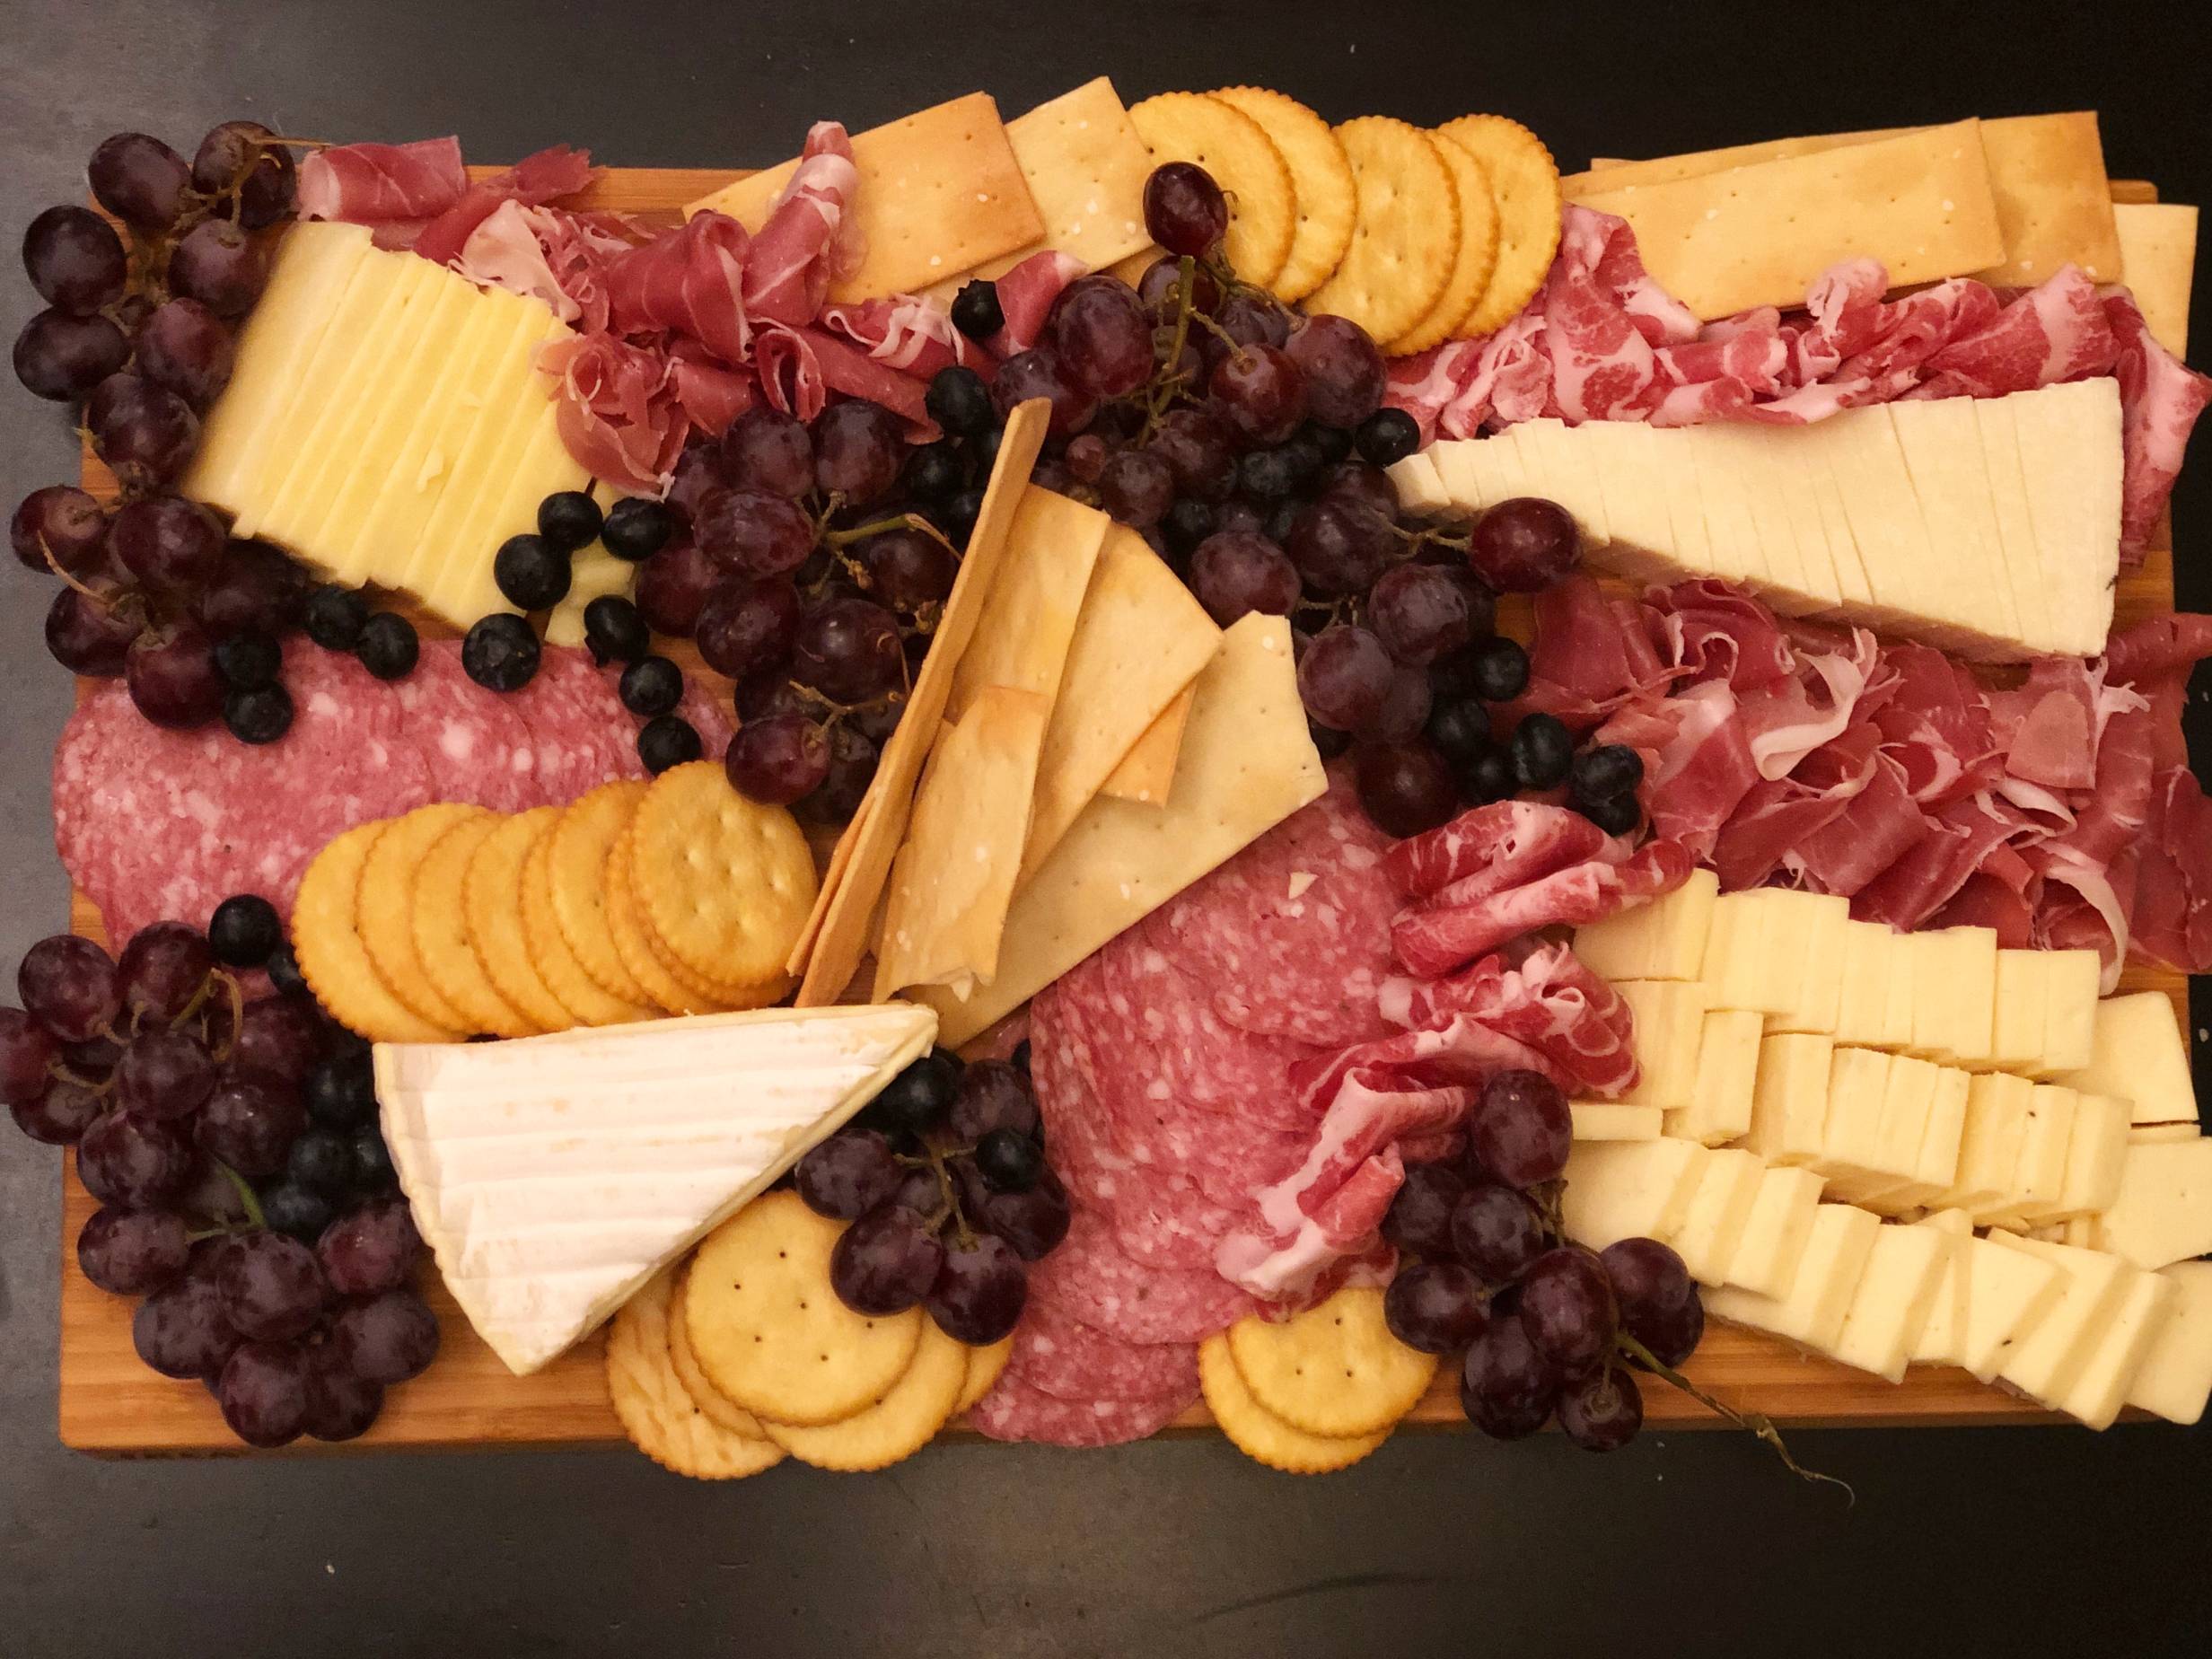 Salami, dry coppa, proscuitto, four kinds of cheese, grape clusters, and blueberries on a wooden cutting board. Photo by Alyssa Buckley.